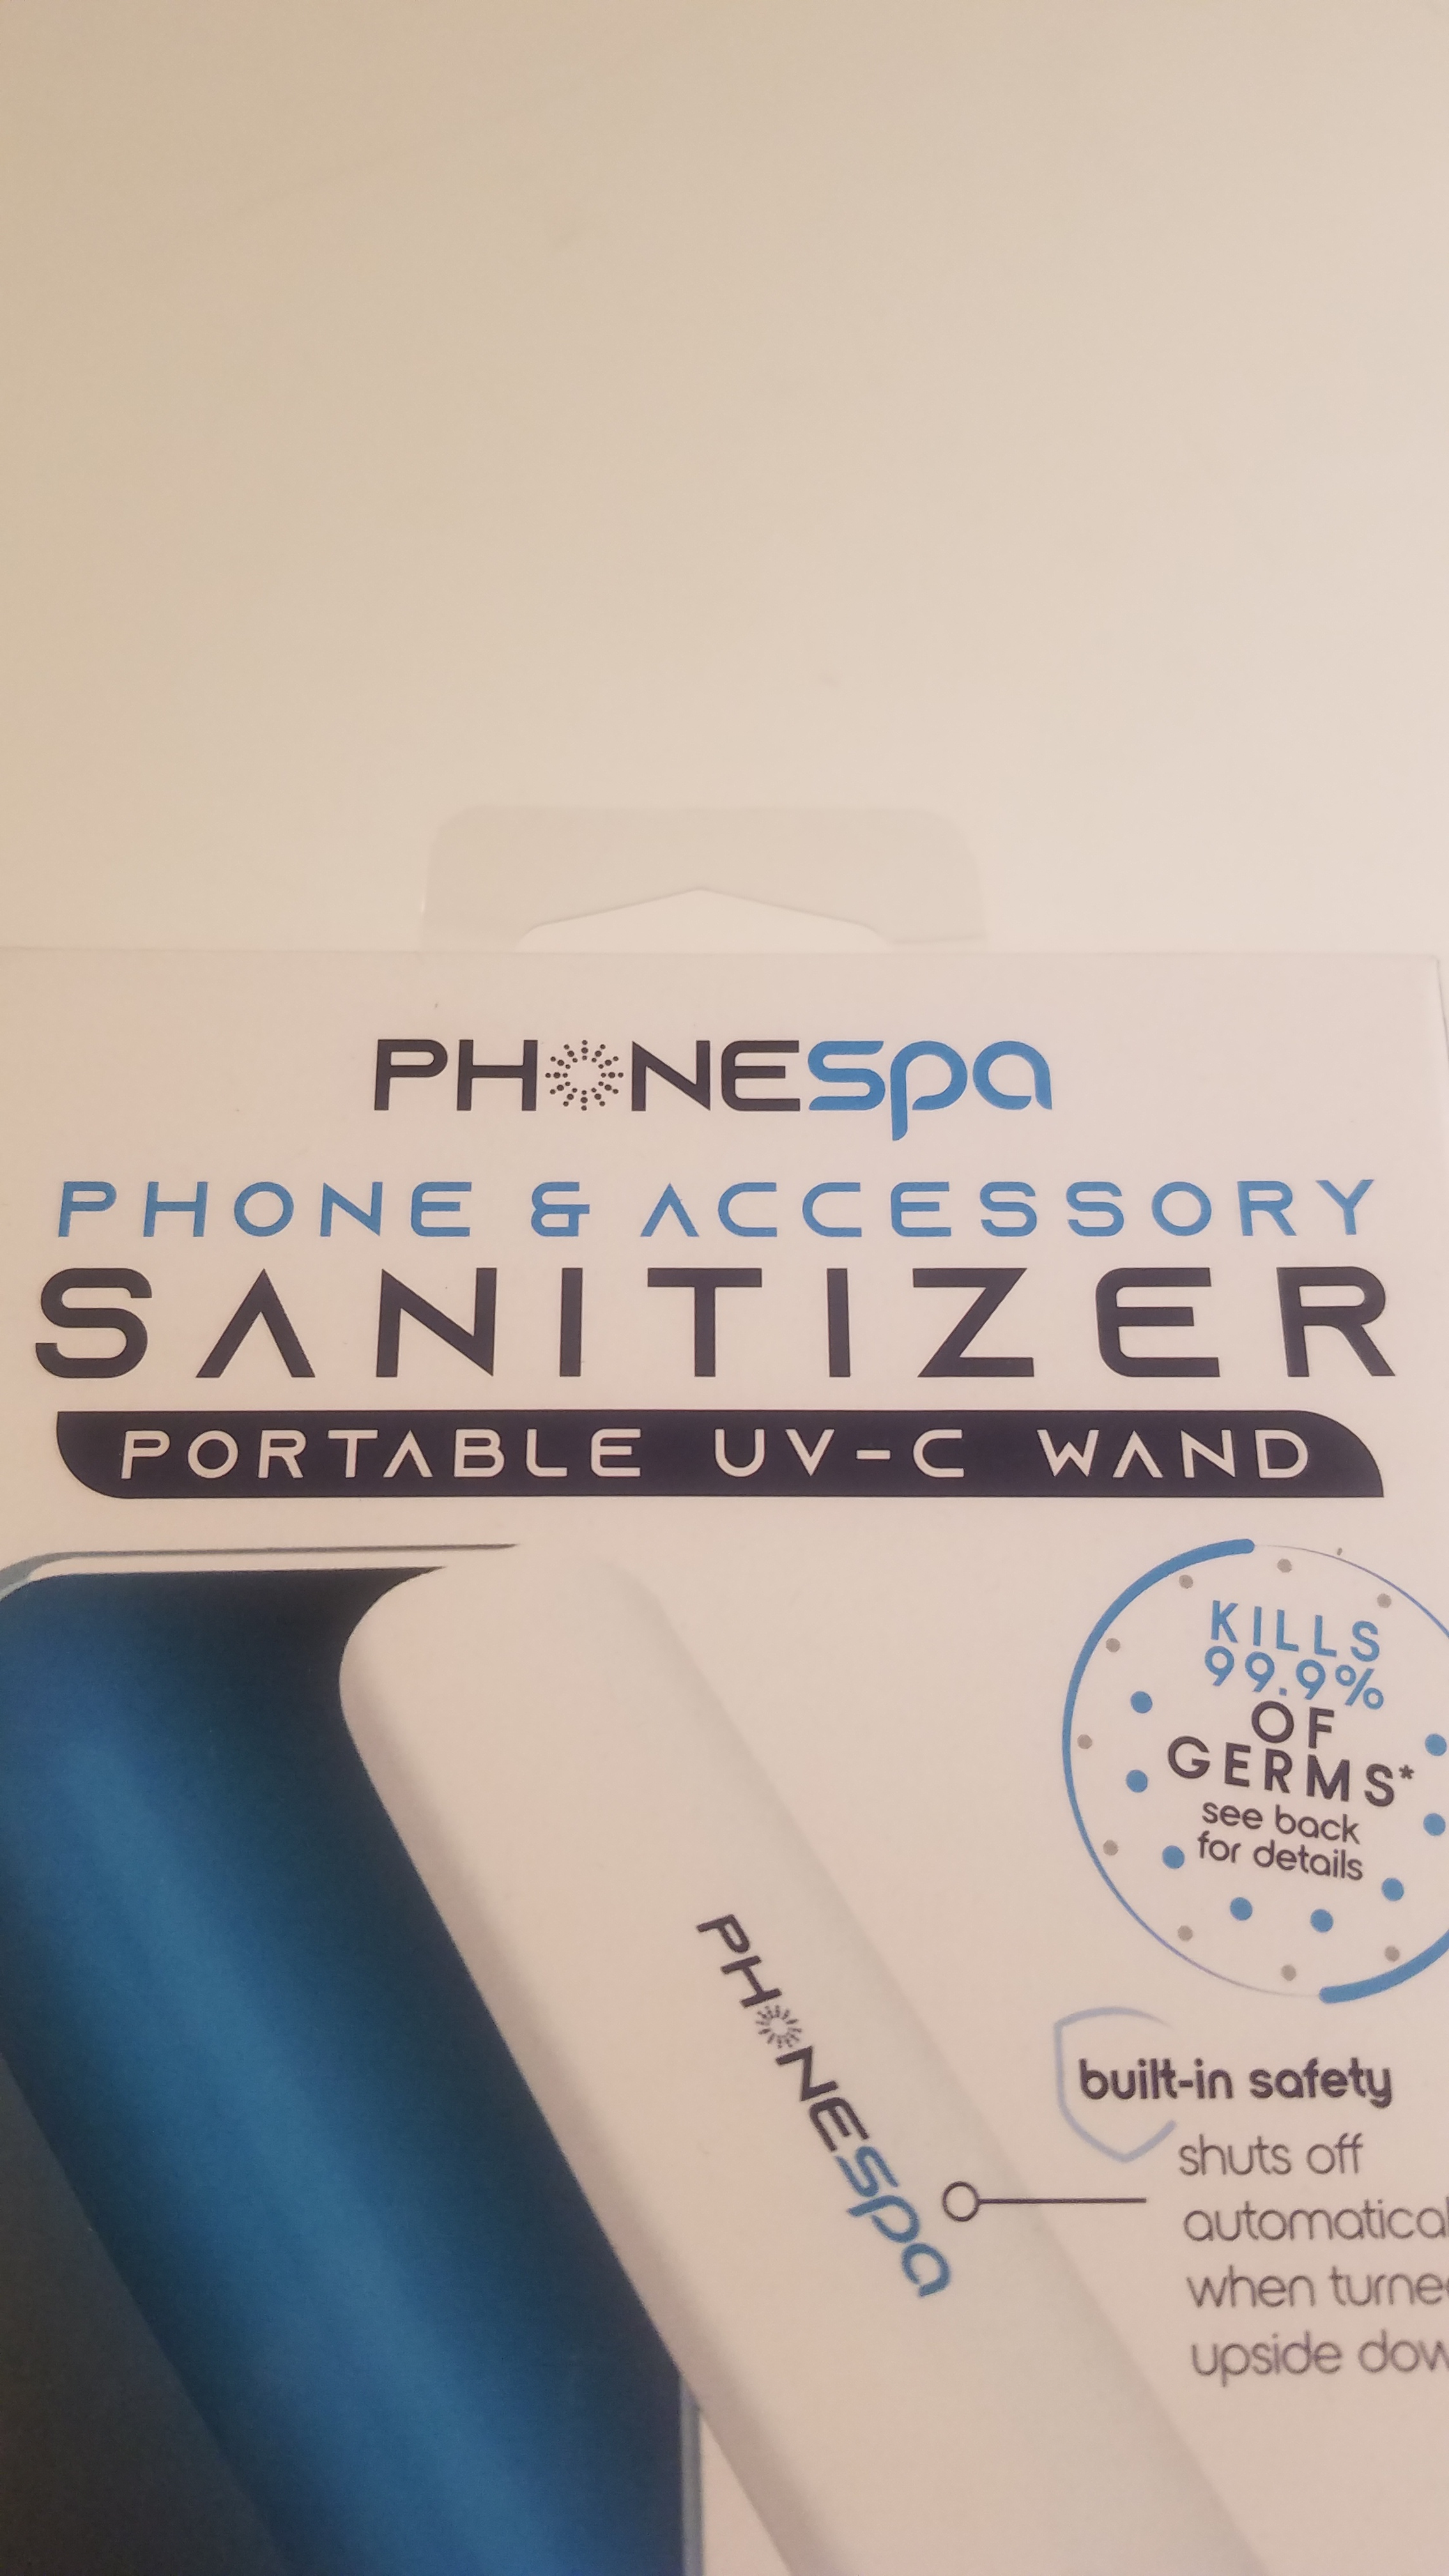 Phone & Accessory Sanitizer Portable UV-C Wand Rechargeable Fast Foldable New